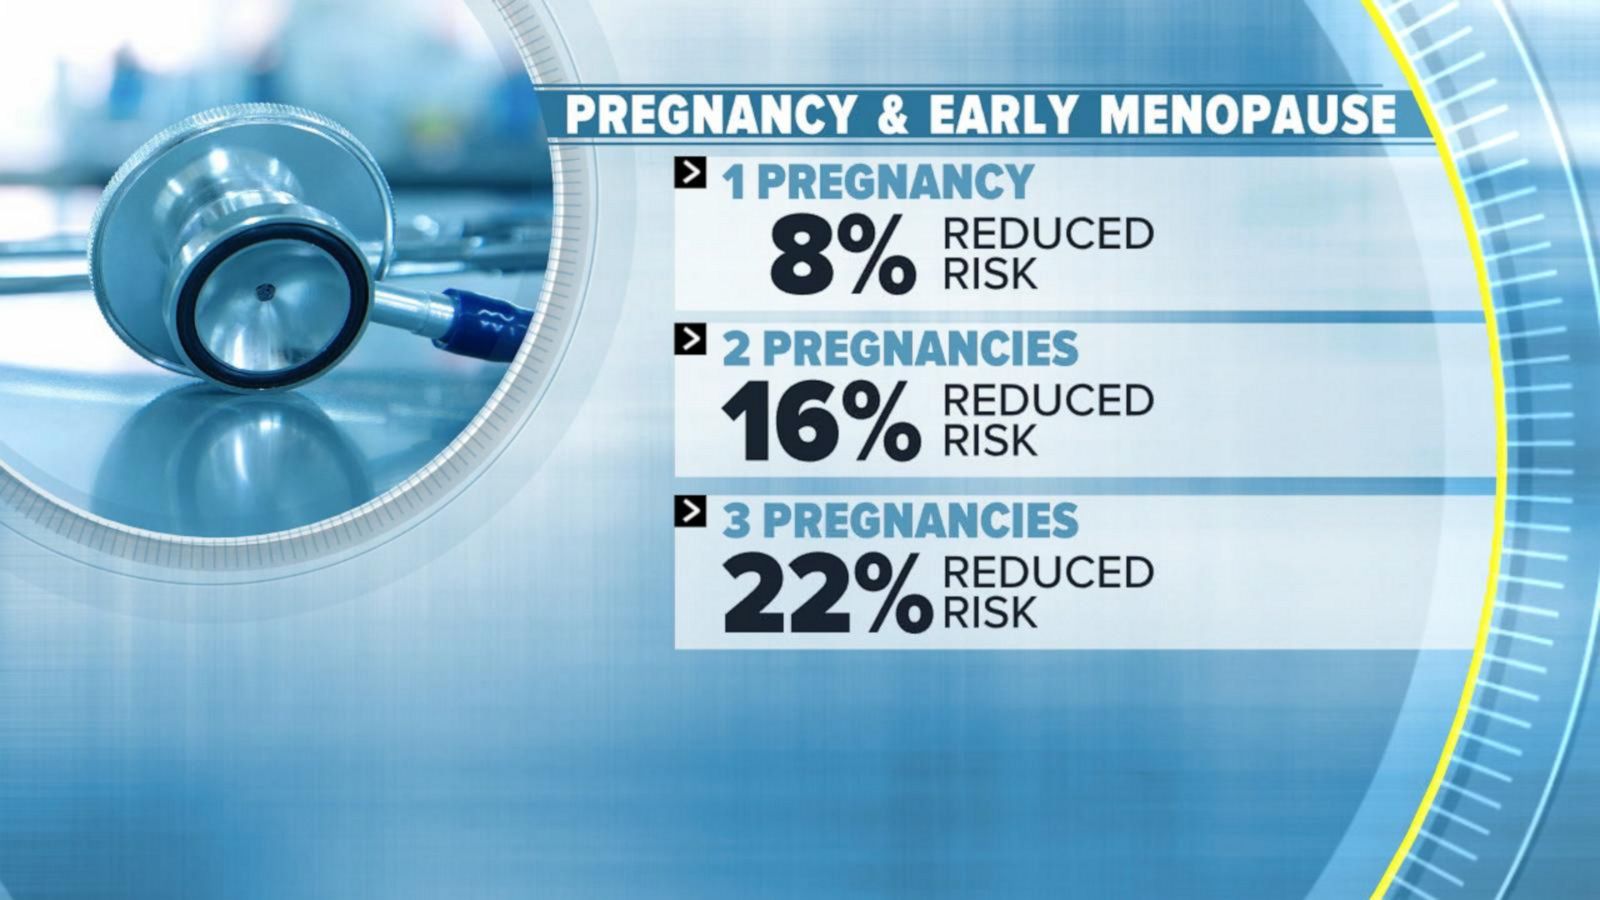 Pregnancy and breastfeeding may lower risk of early menopause - Good  Morning America